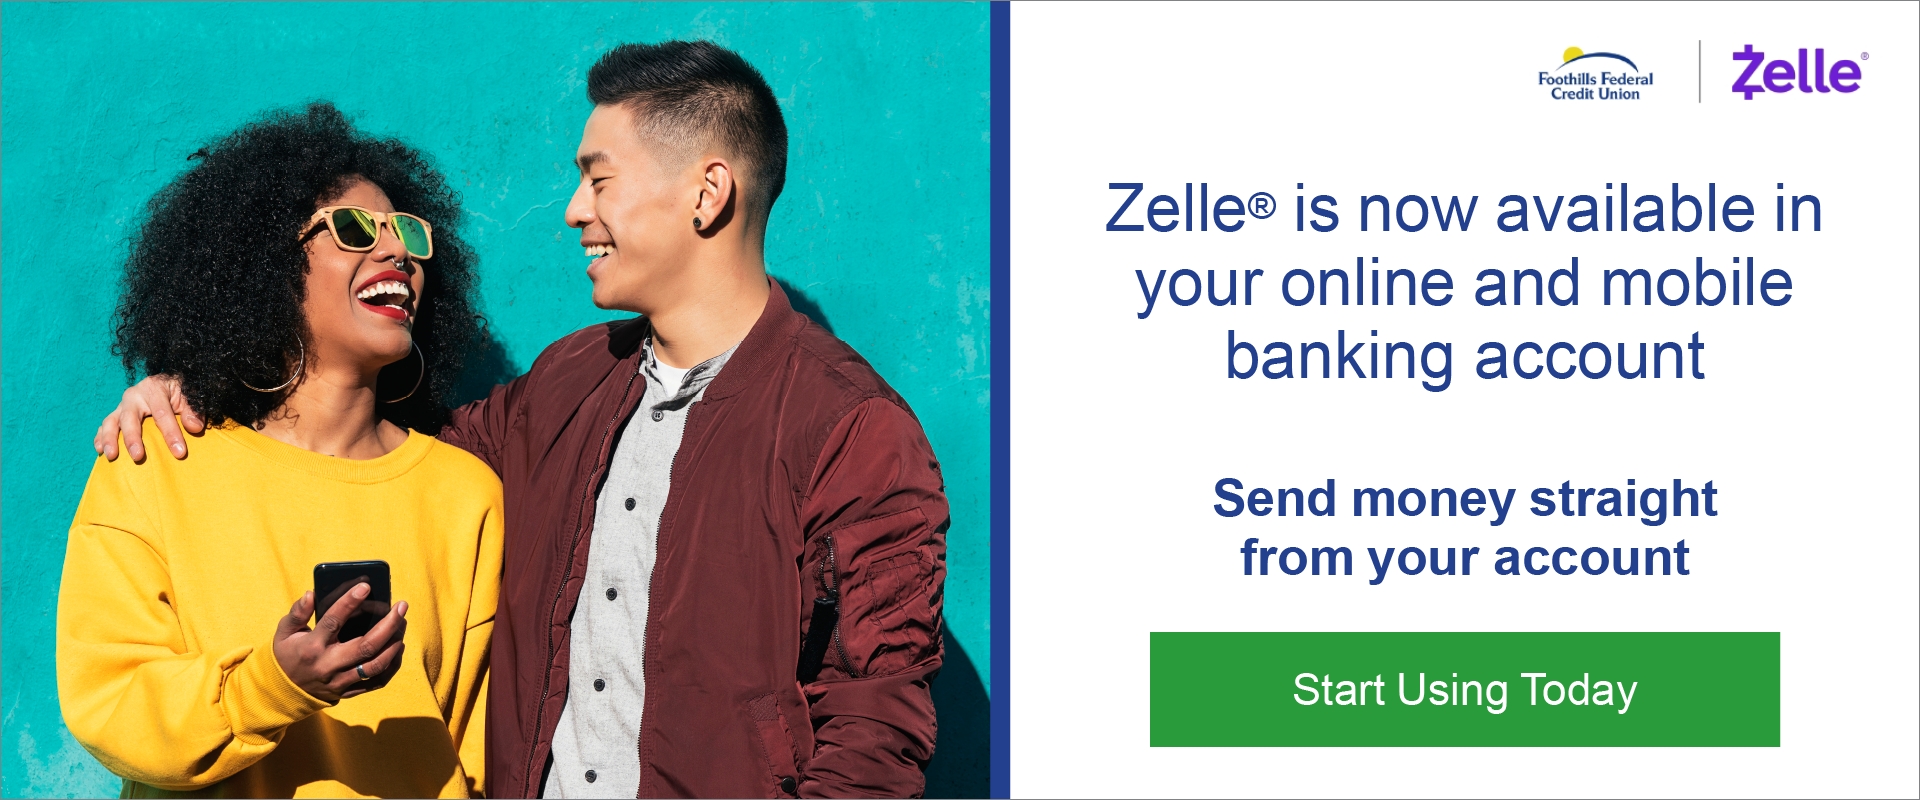 Zelle is now available in your online and mobile banking account.  Send money straight from your account.  Start Using Today.  Picture of a guy smiling at a smiling lady with his arms around her shoulders.  She is holding a cell phone in her right hand.